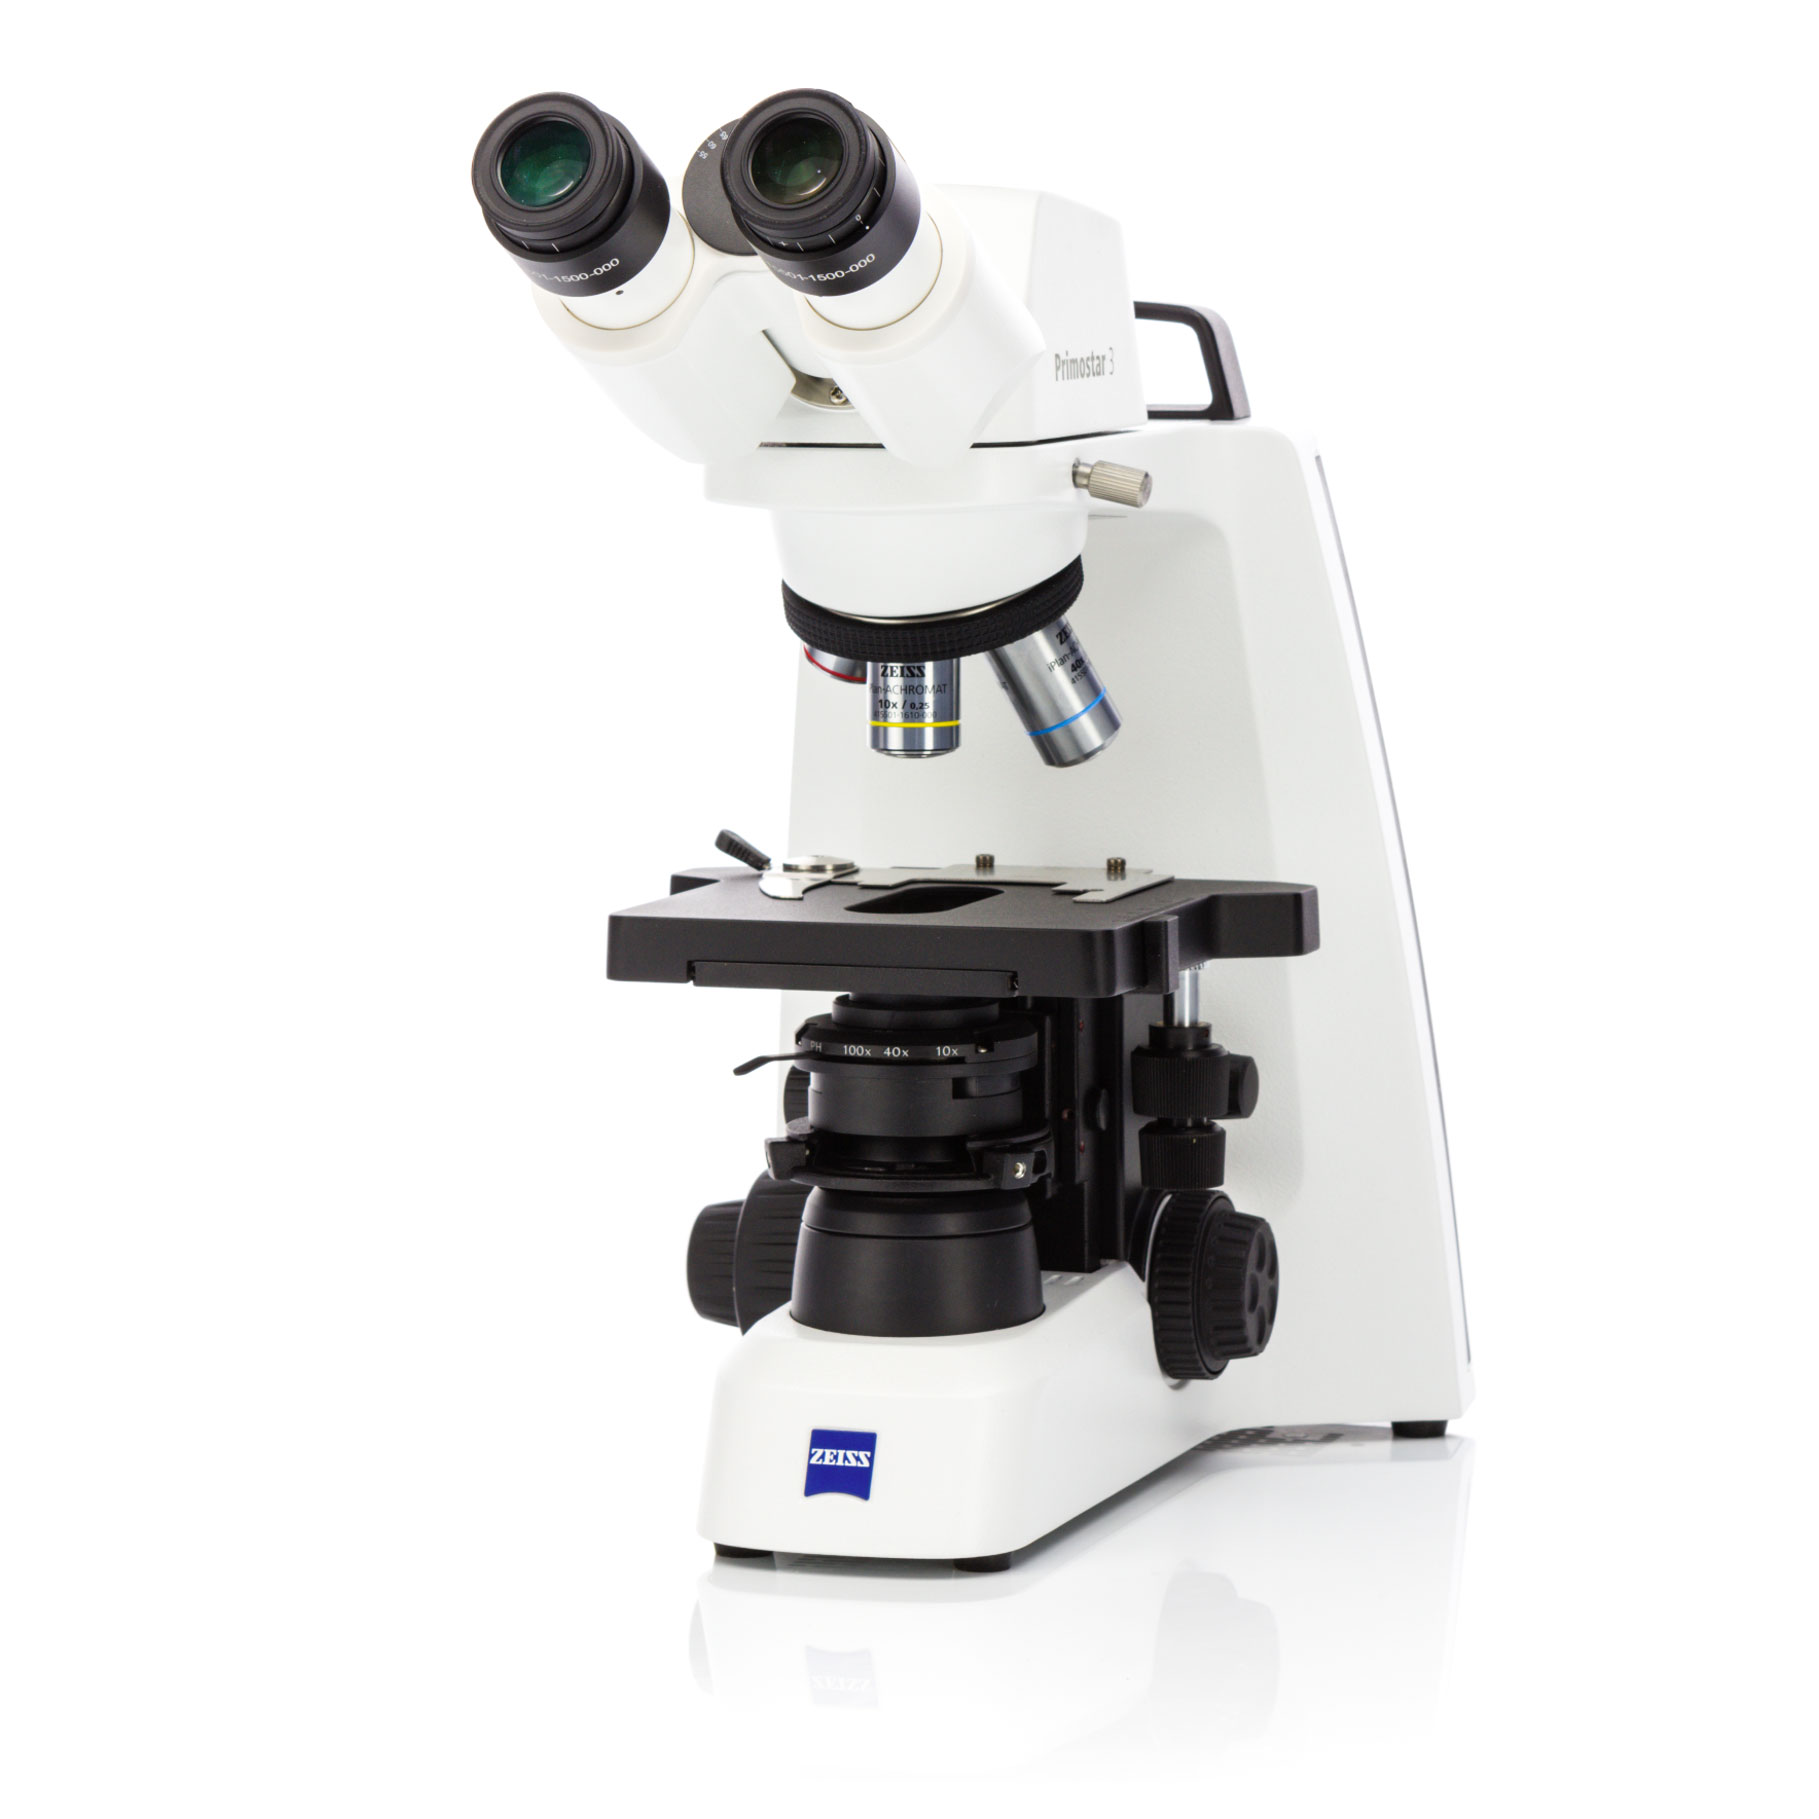 Microscope for Digital Teaching and Routine Lab